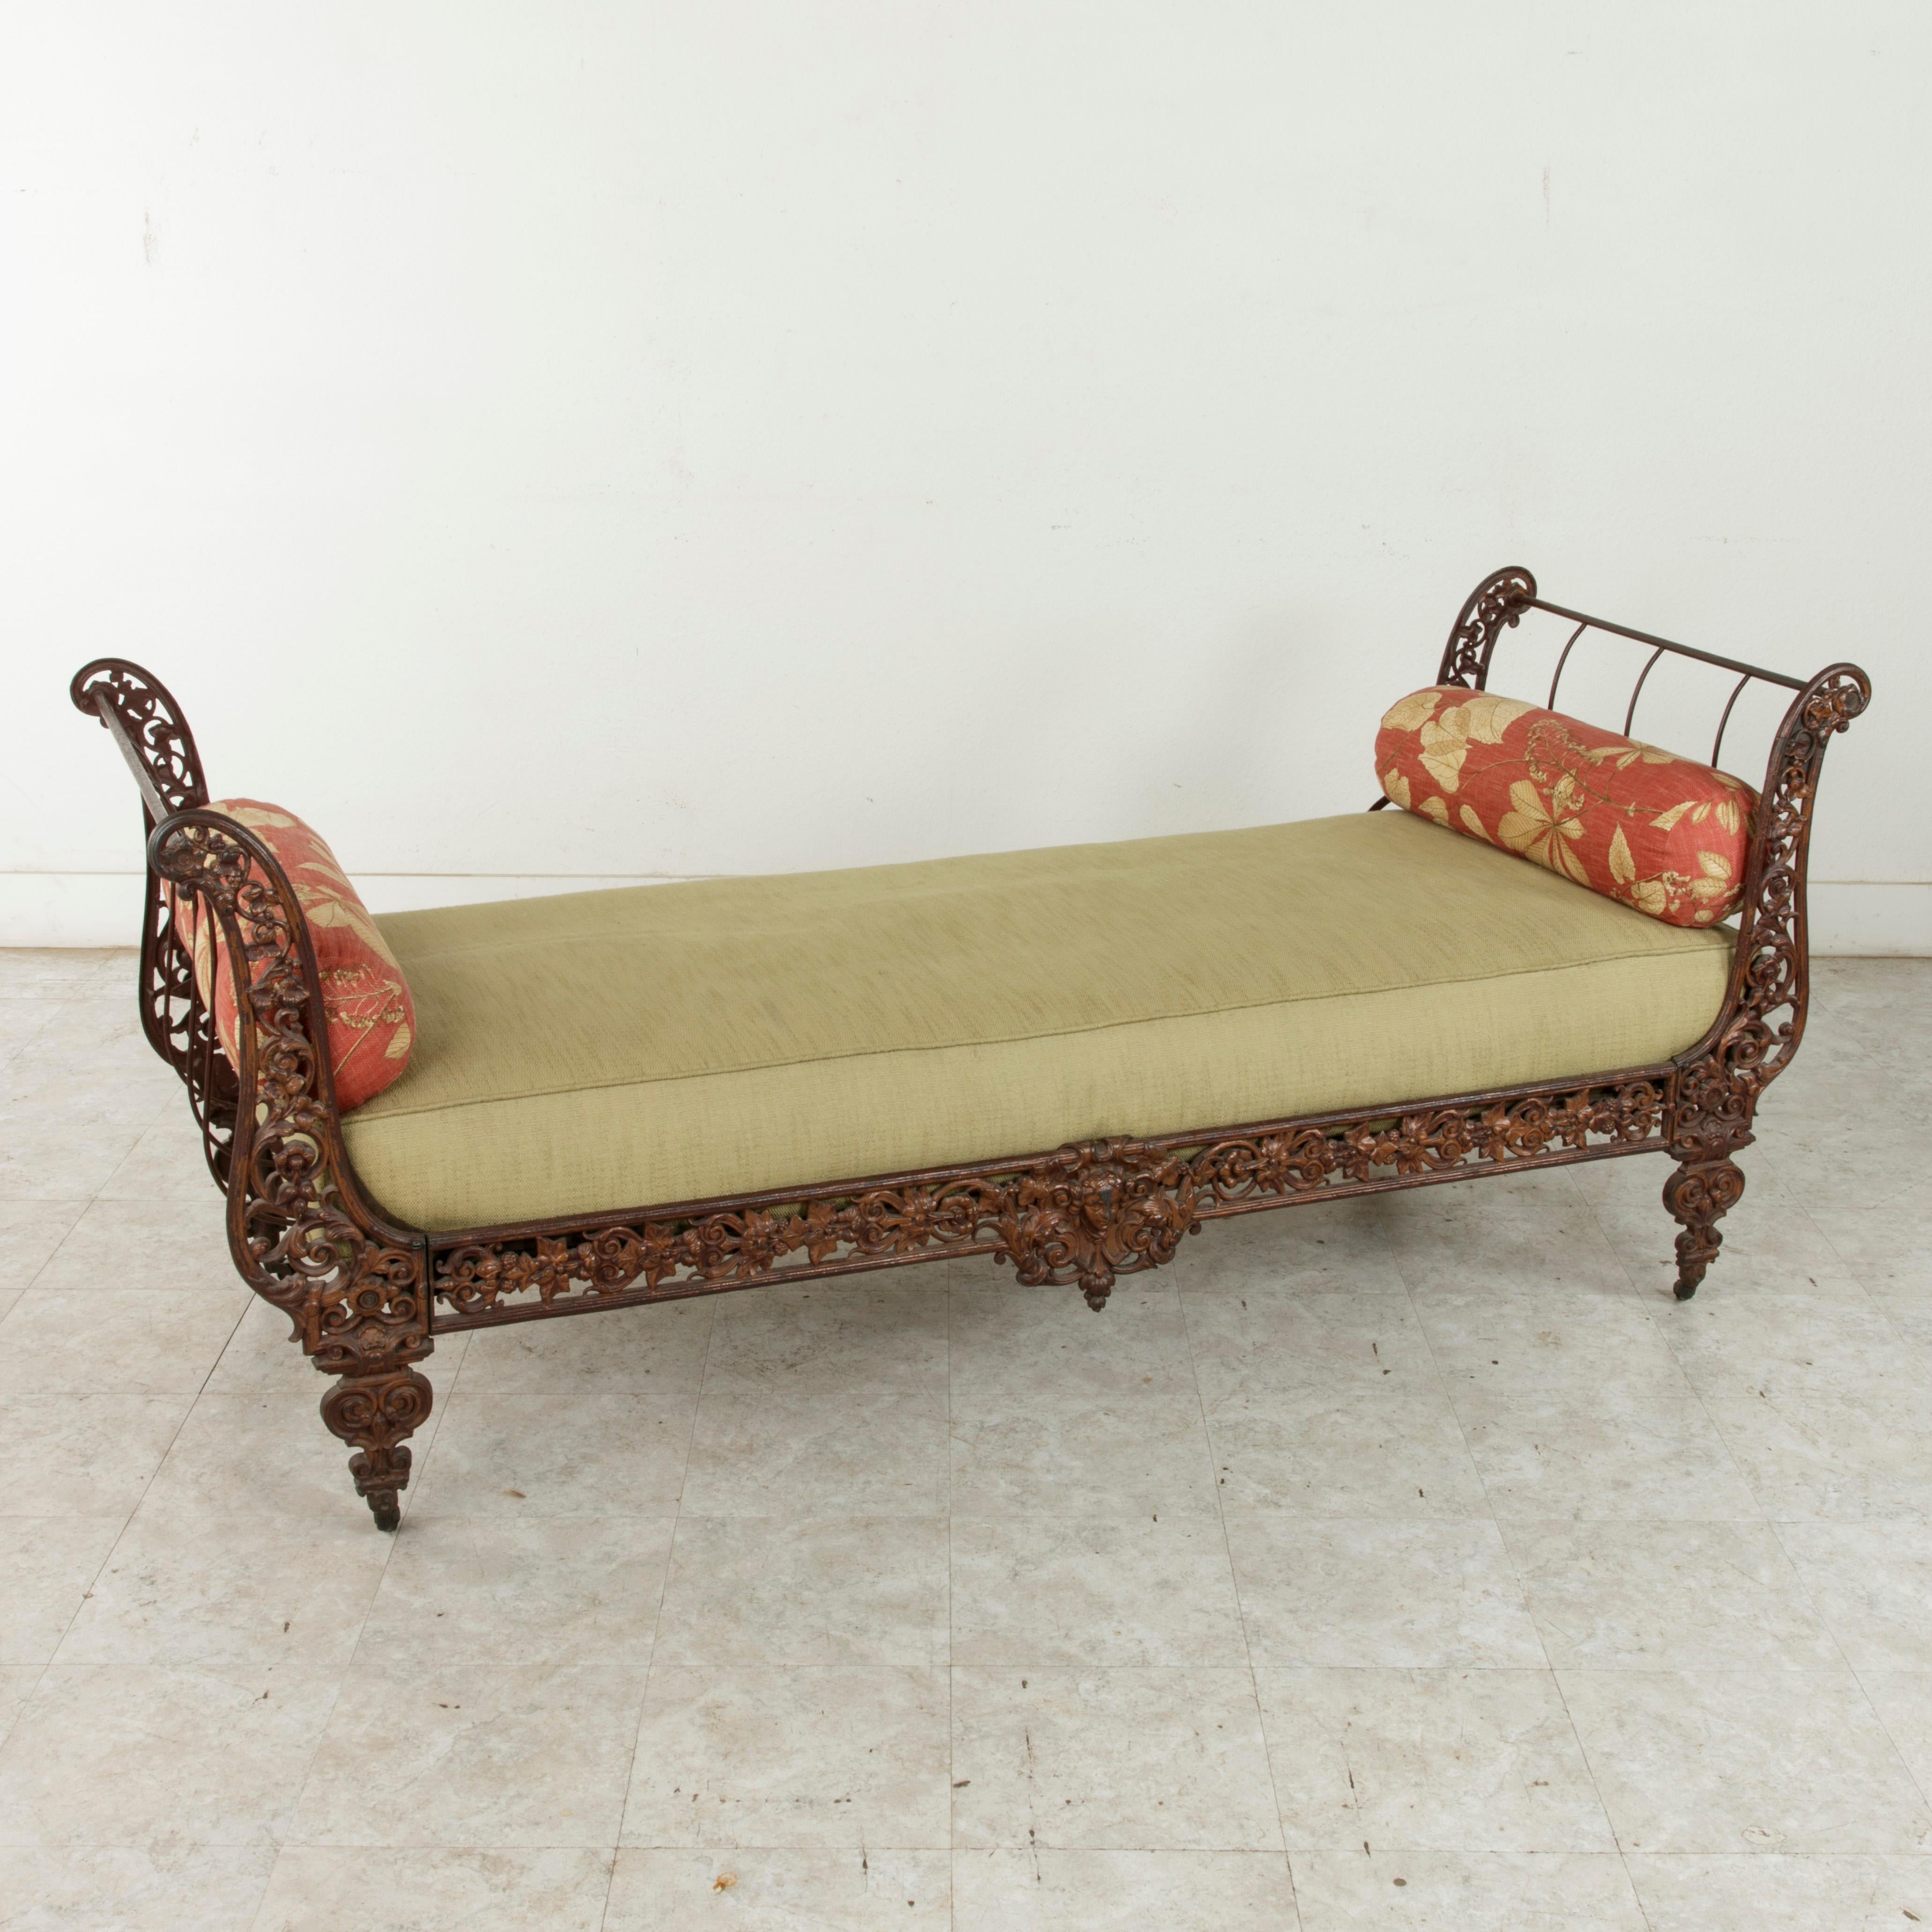 This 19th century French Napoleon III period daybed features a cast iron frame detailed with central cartouche and masque flanked by scrolling branches and leaves that extend out to the curved sides. The frame rests on stylized legs on castors. This